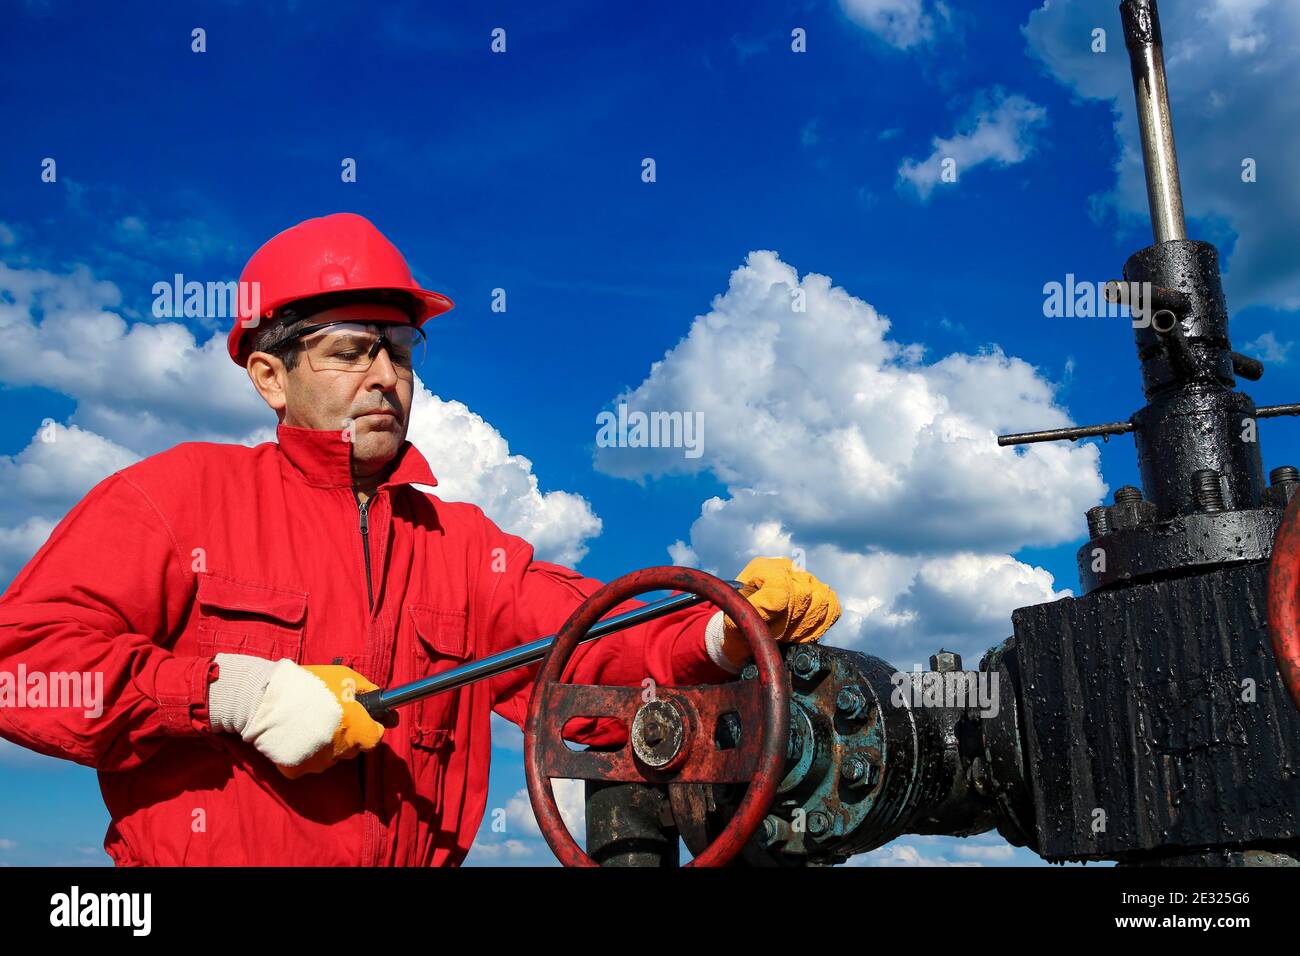 Petroleum Worker in Red Coveralls and Protective Clothing Against Blue Sky and White Clouds. Oil Rig Equipment Maintenance. Stock Photo